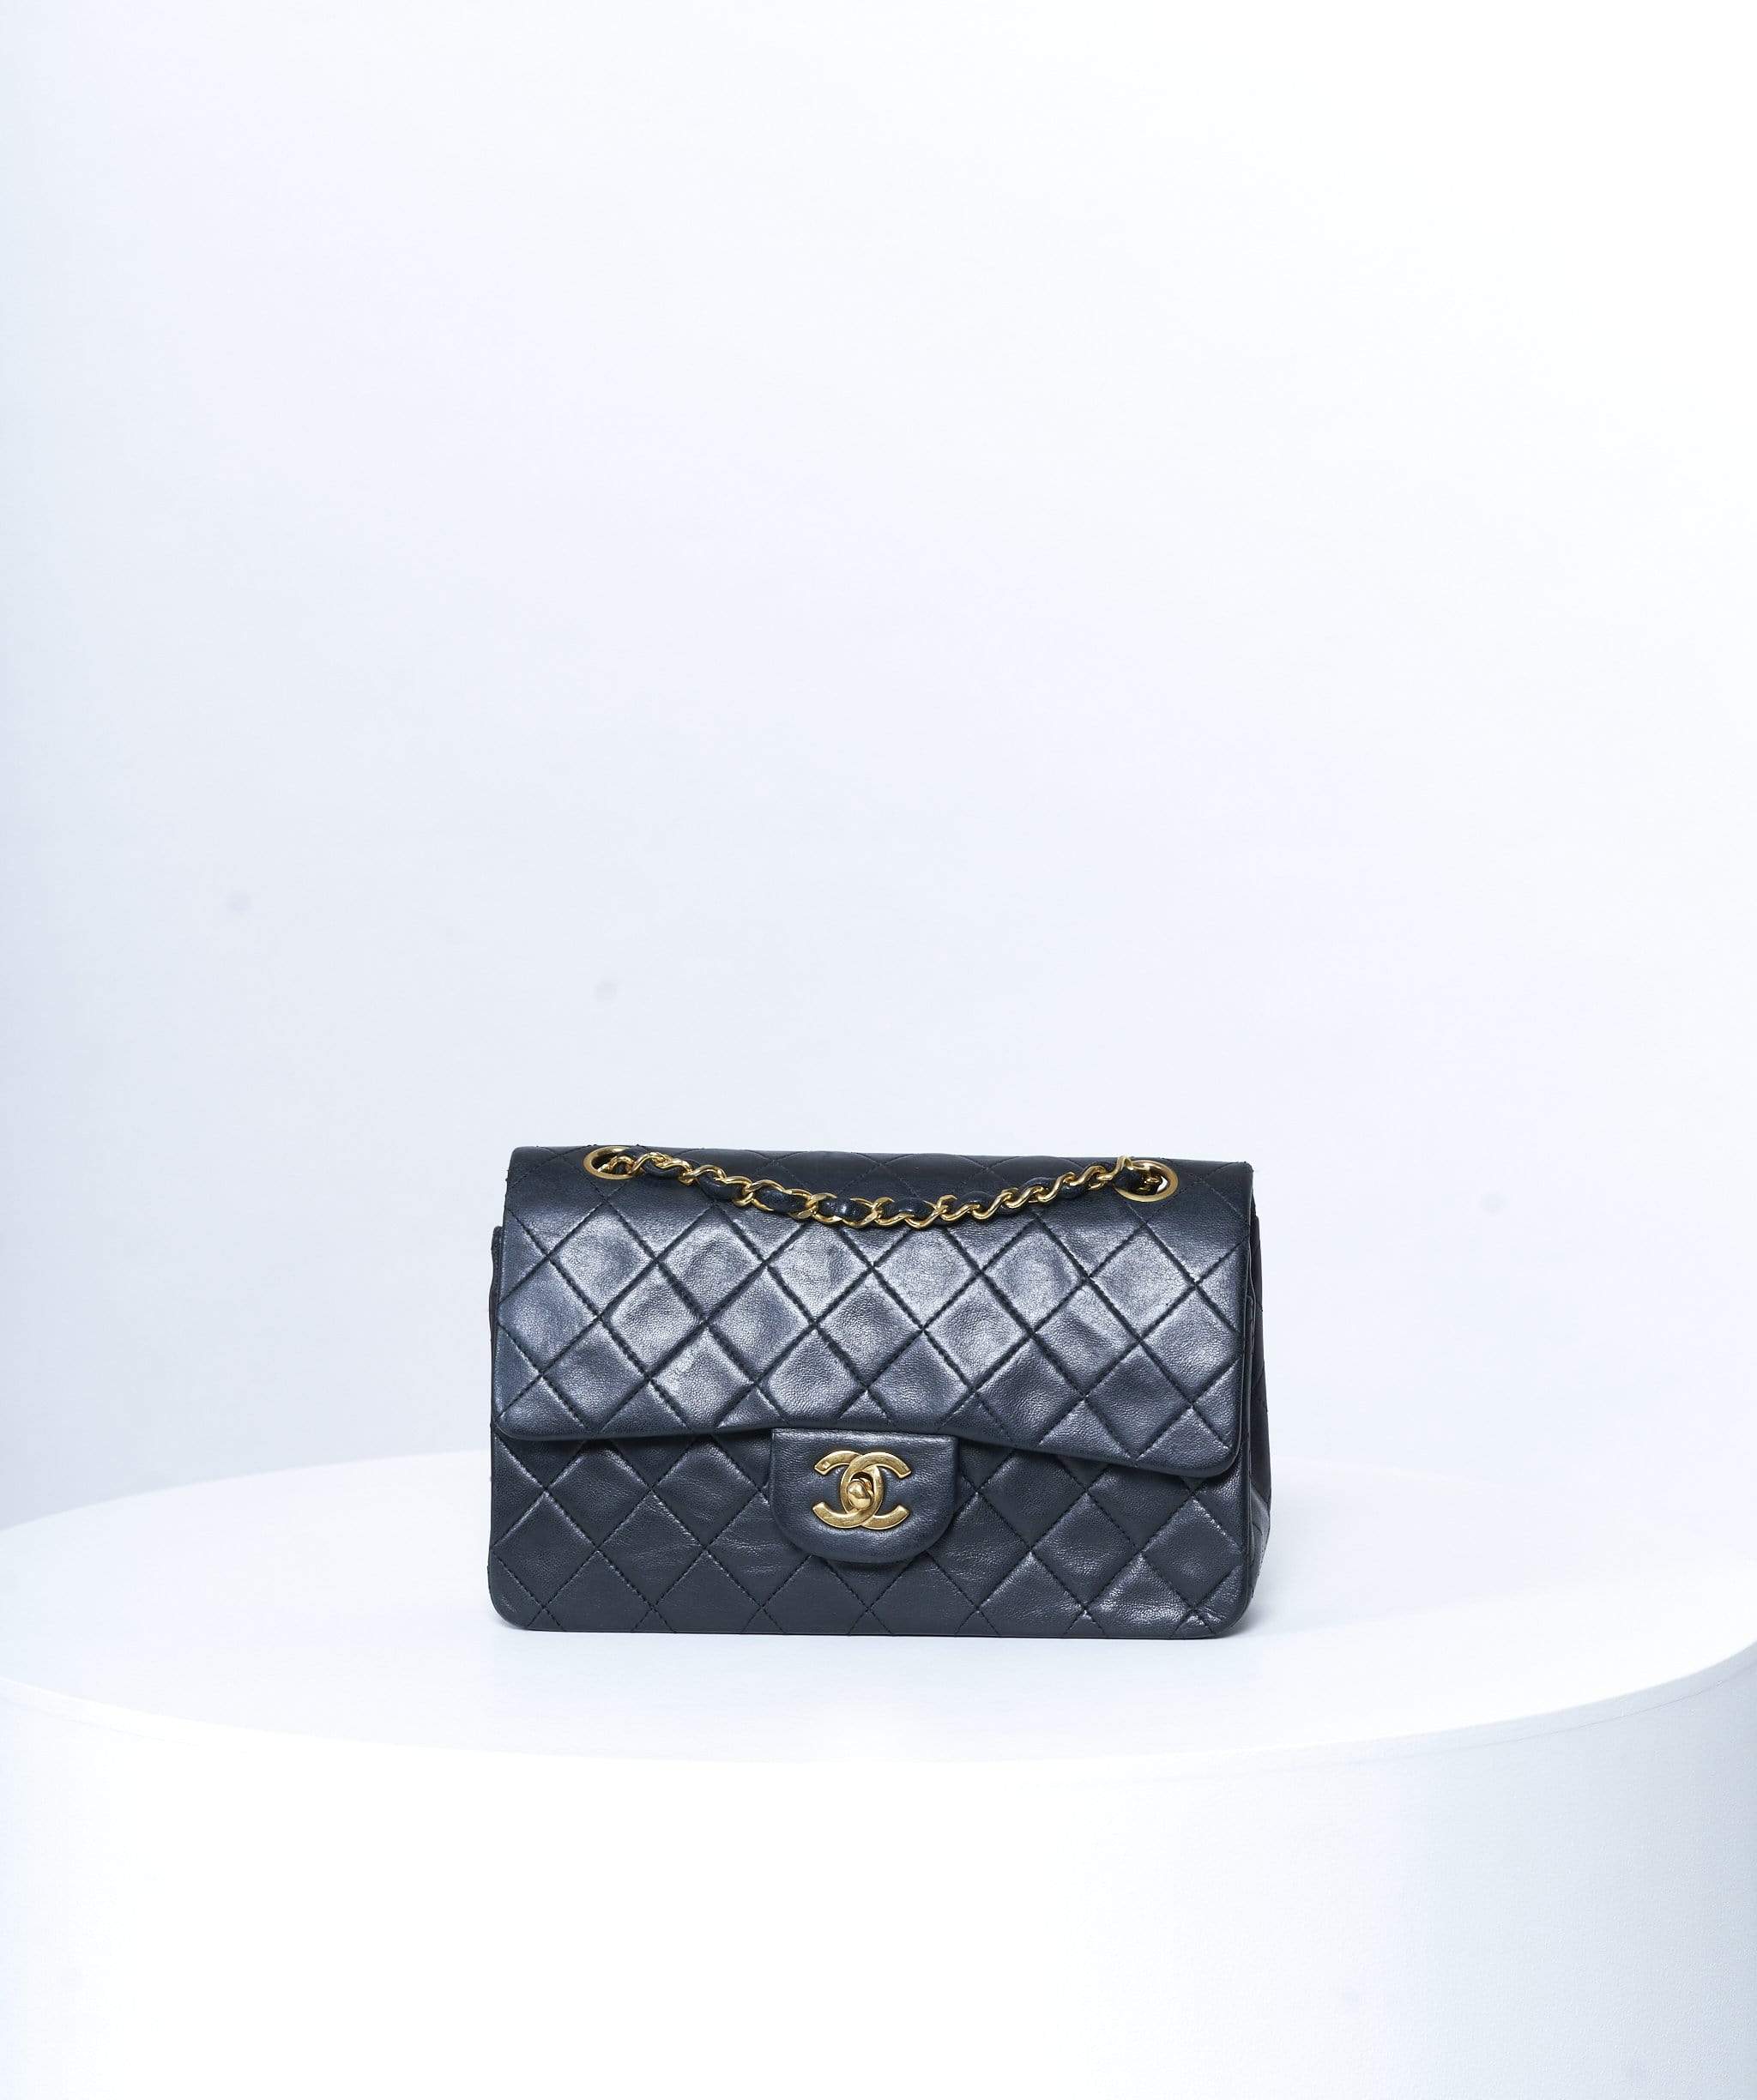 Chanel Chanel 9 inches - small bag